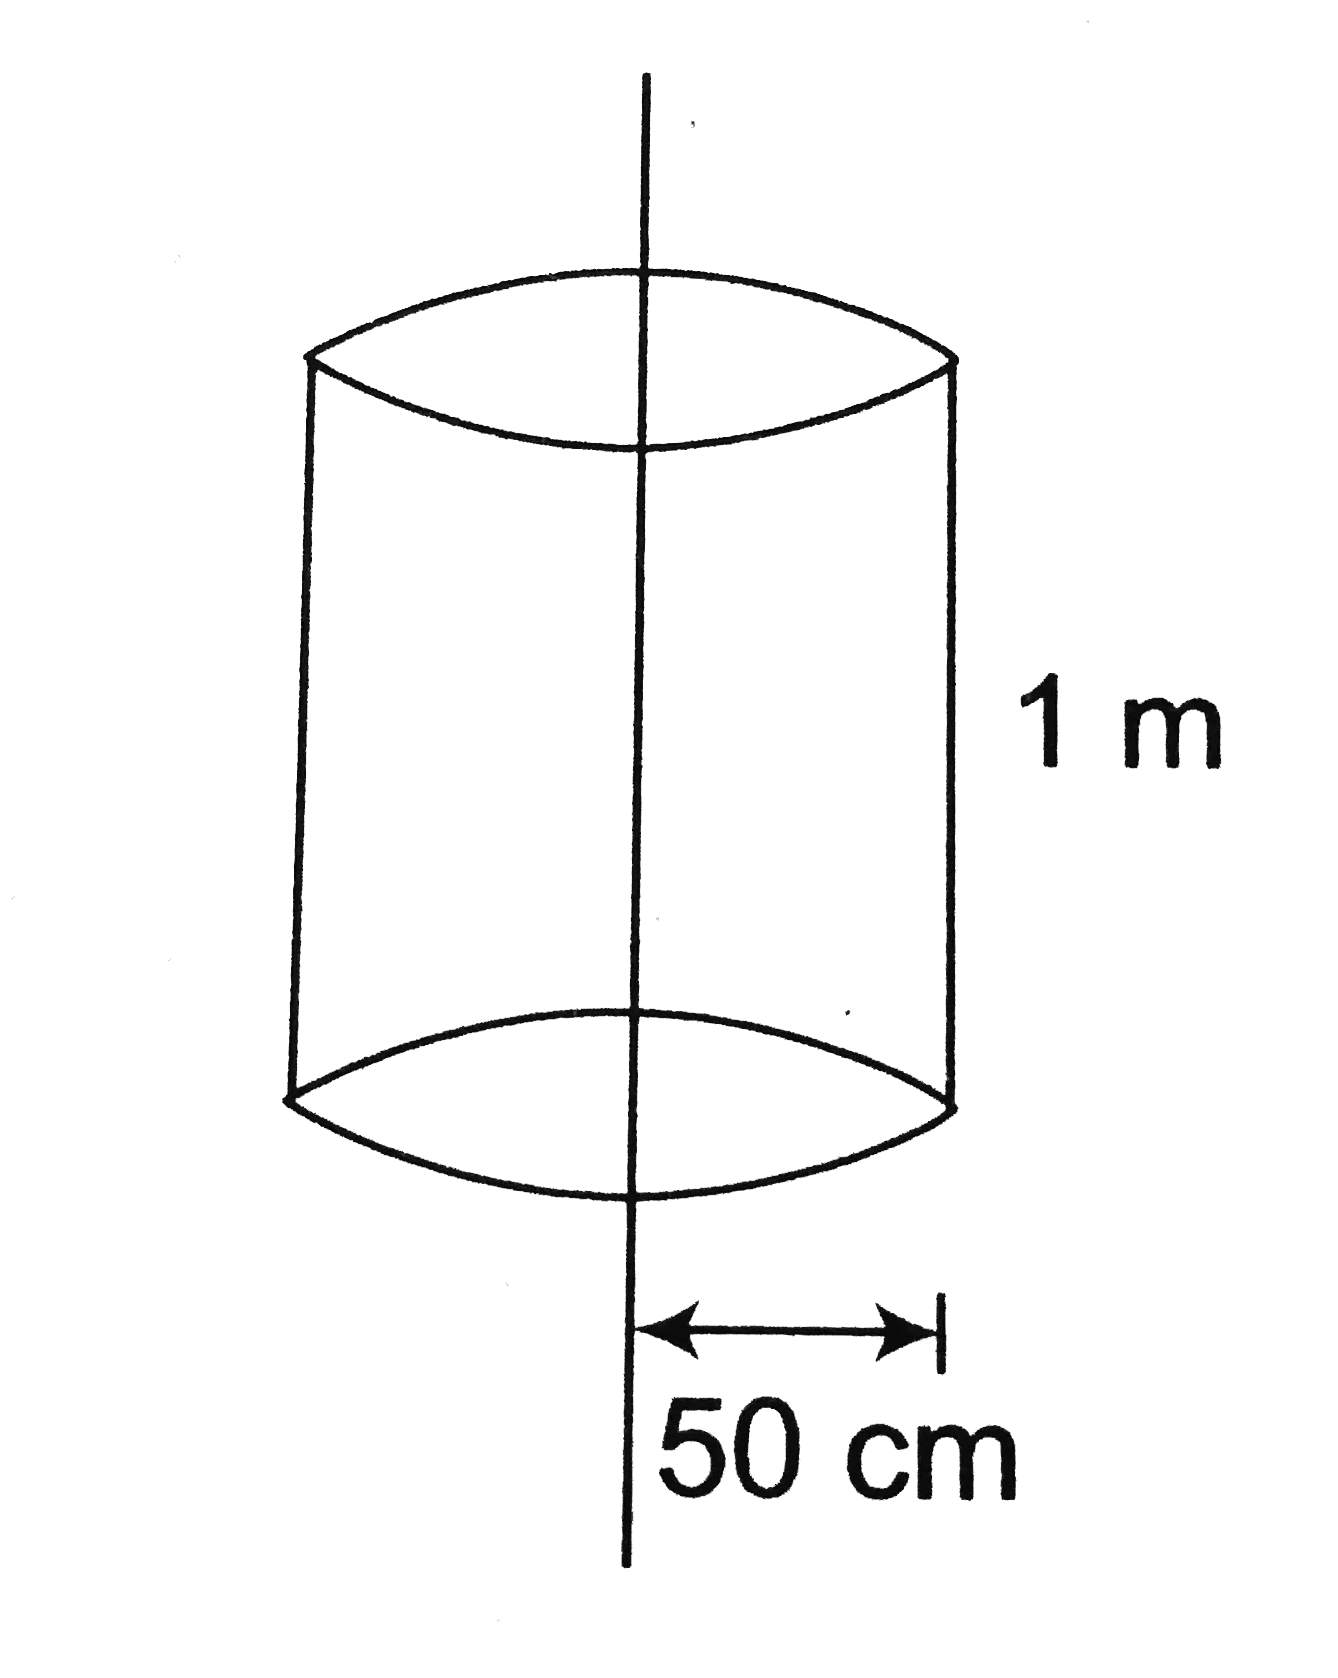 Electric charge is uniformly distributed along a straight wire of radius 1 mm. The charge per centimeter length of the wire is Q coulomb. Another cylindrical surface of radius 50 cm and length 1 m symmetrically enclose the wire as shown in figure. The total electric flux passing through the cylindrical surface is